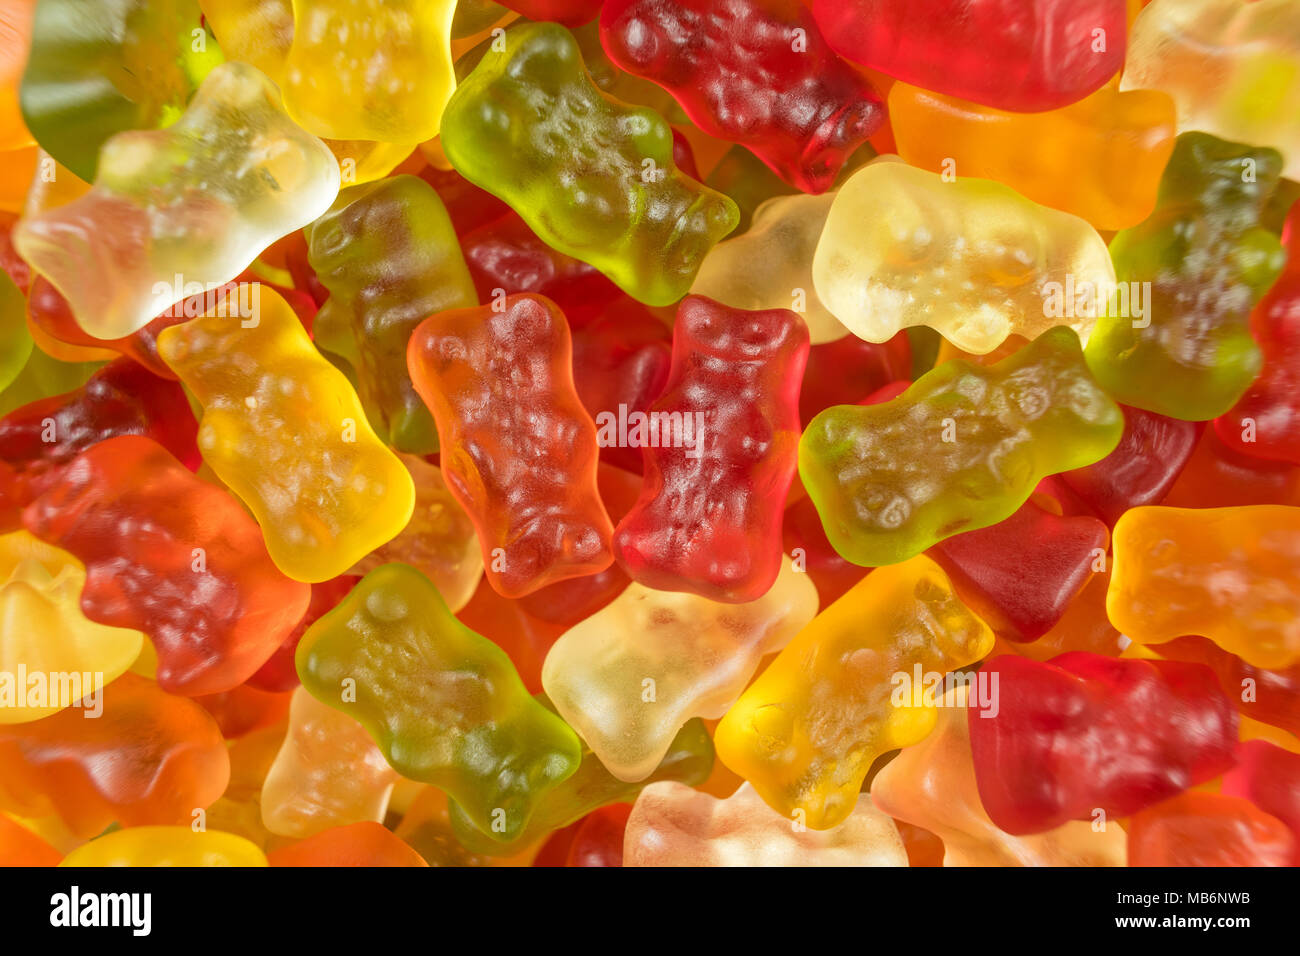 Colourful jelly babies / gummy bear candy sweets. Potential use as a background. Stock Photo